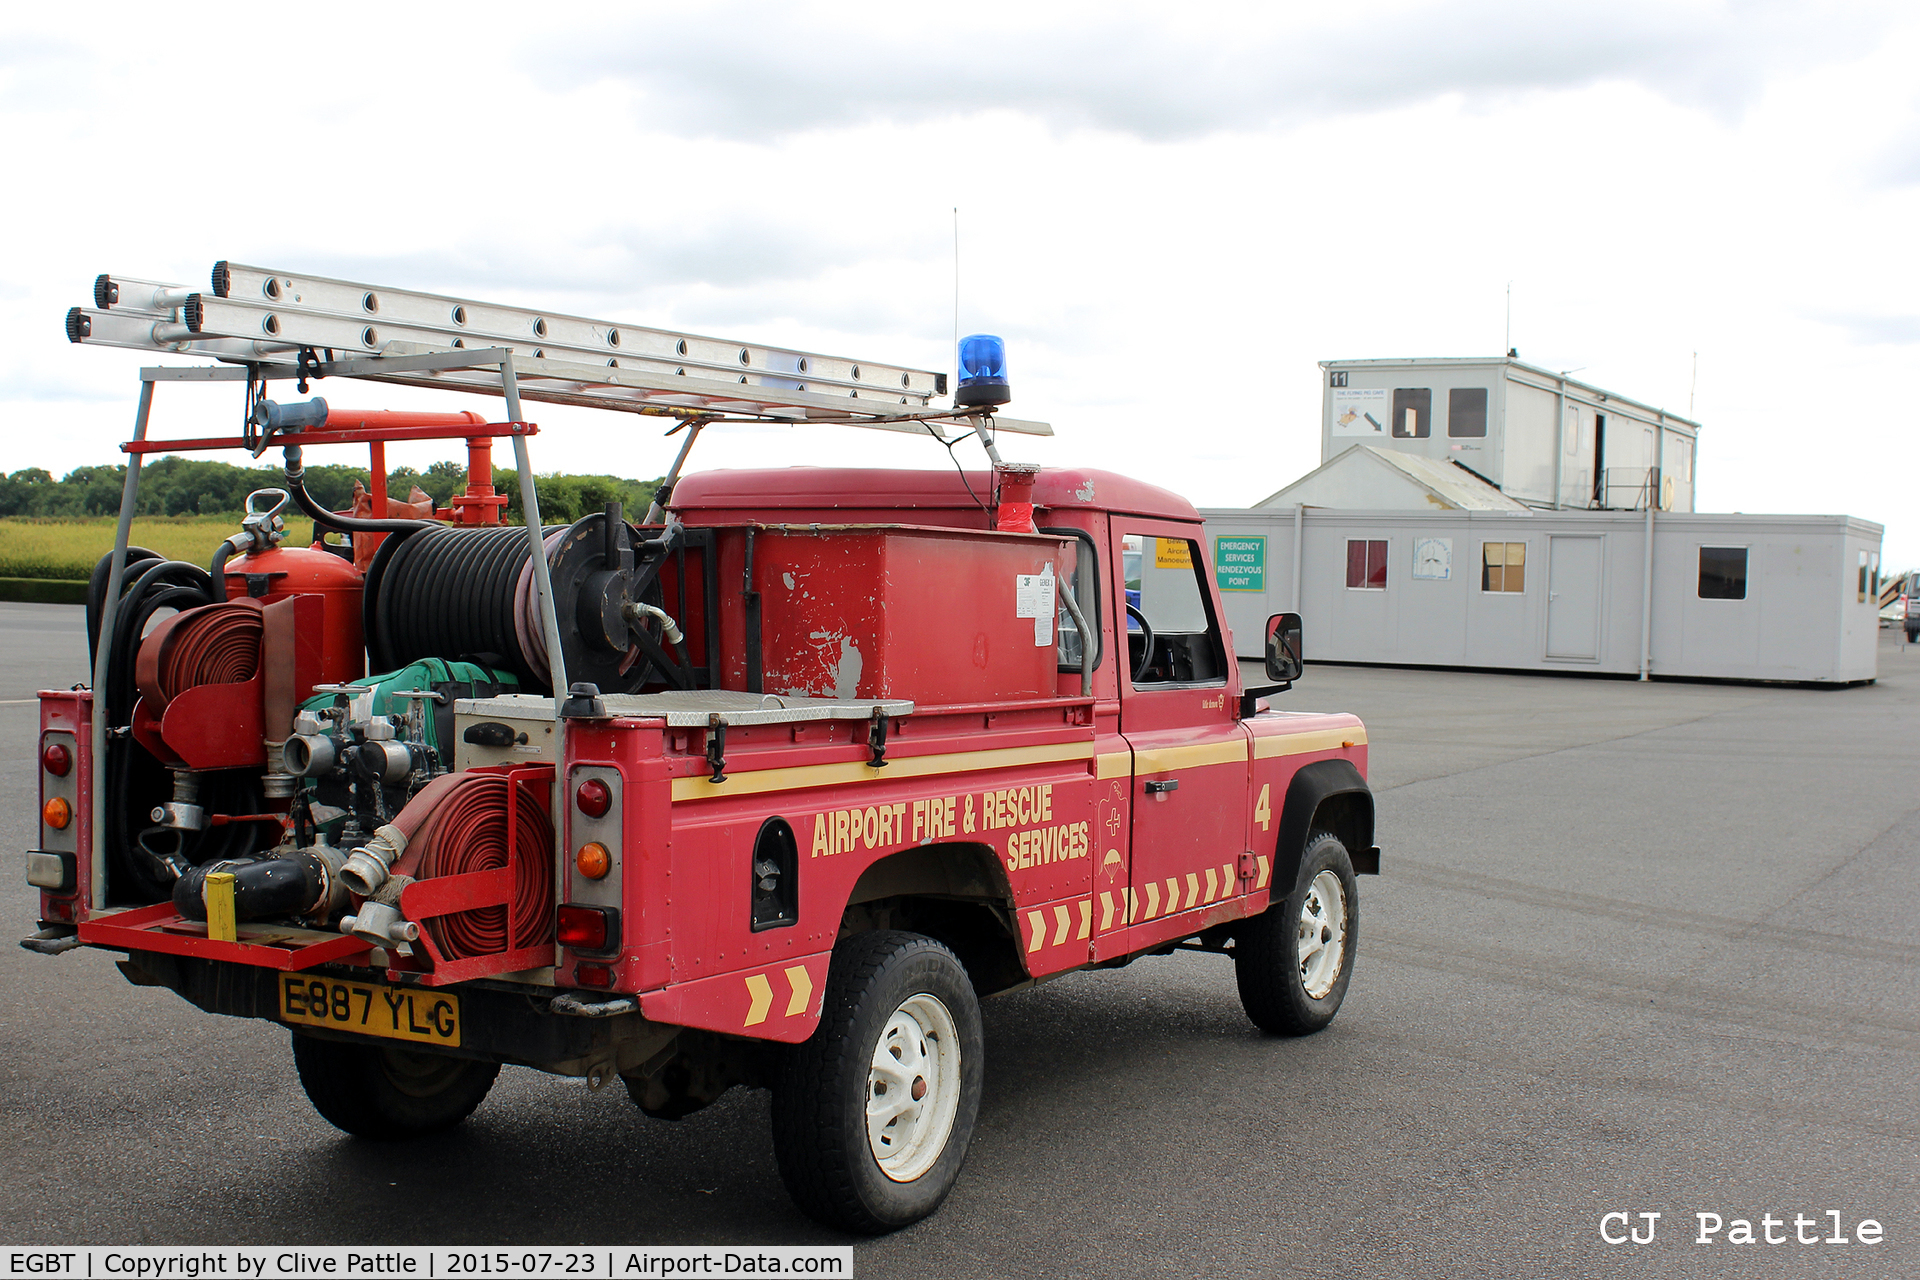 Turweston Aerodrome Airport, Turweston, England United Kingdom (EGBT) - The Fire Rescue Landrover at Turweston airfield with the temporary 'portacabin' ATC and Cafe accommodation in the background.